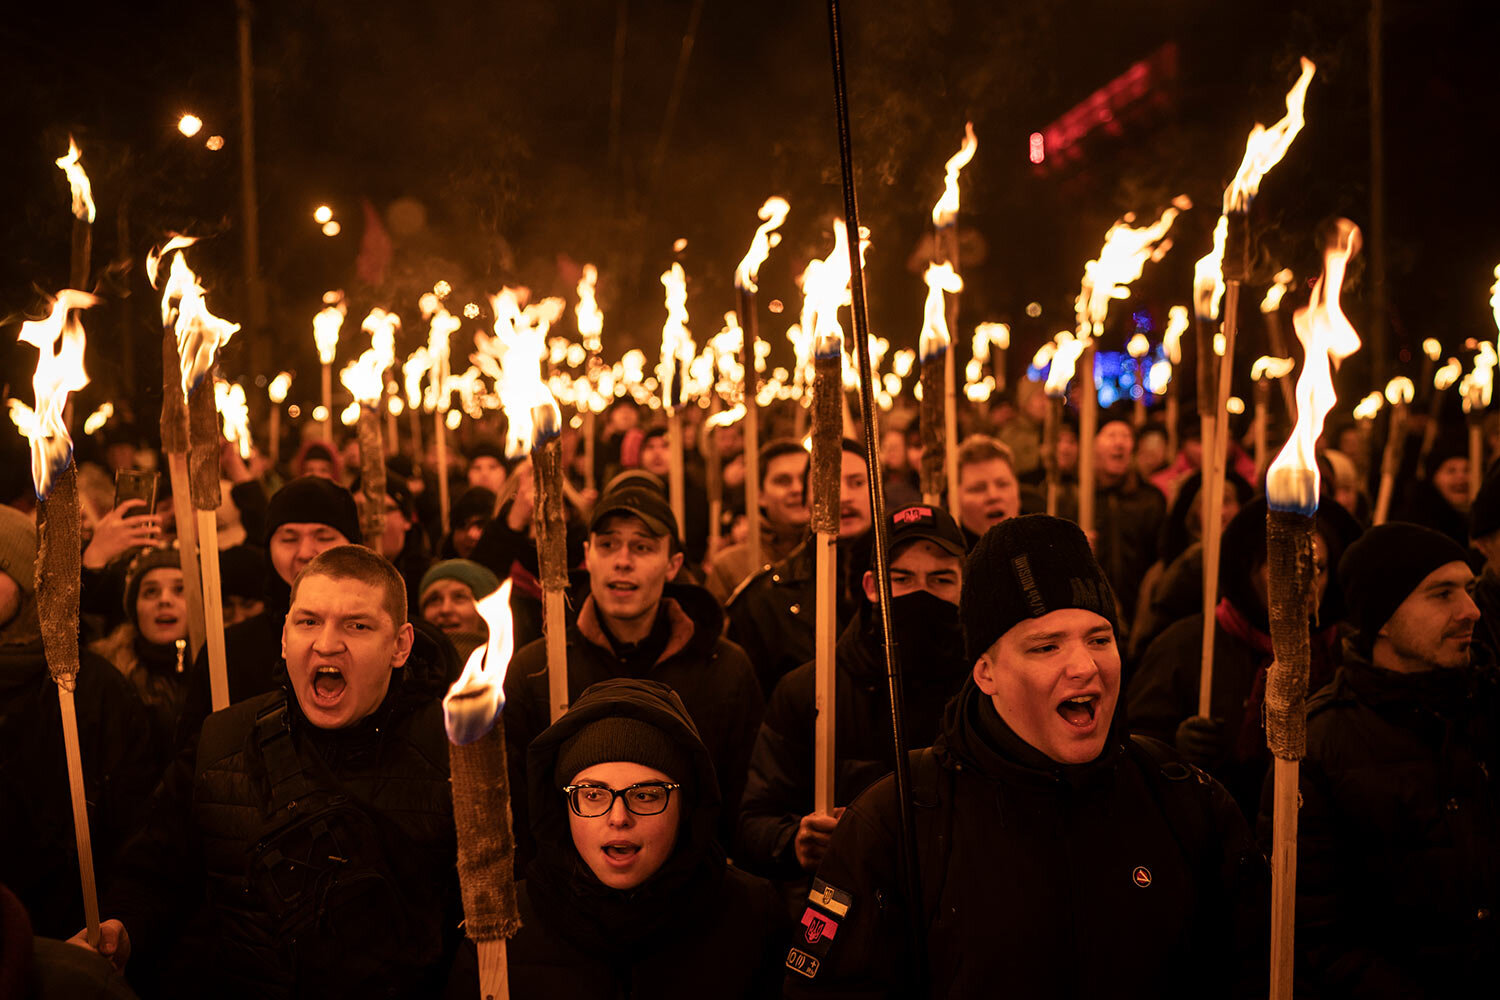  In this Jan. 1, 2019 photo, Nationalist carry torches during a rally to mark the birth anniversary of Stepan Bandera, founder of a rebel army that fought against the Soviet regime, in Kiev, Ukraine. (AP Photo/Felipe Dana) 